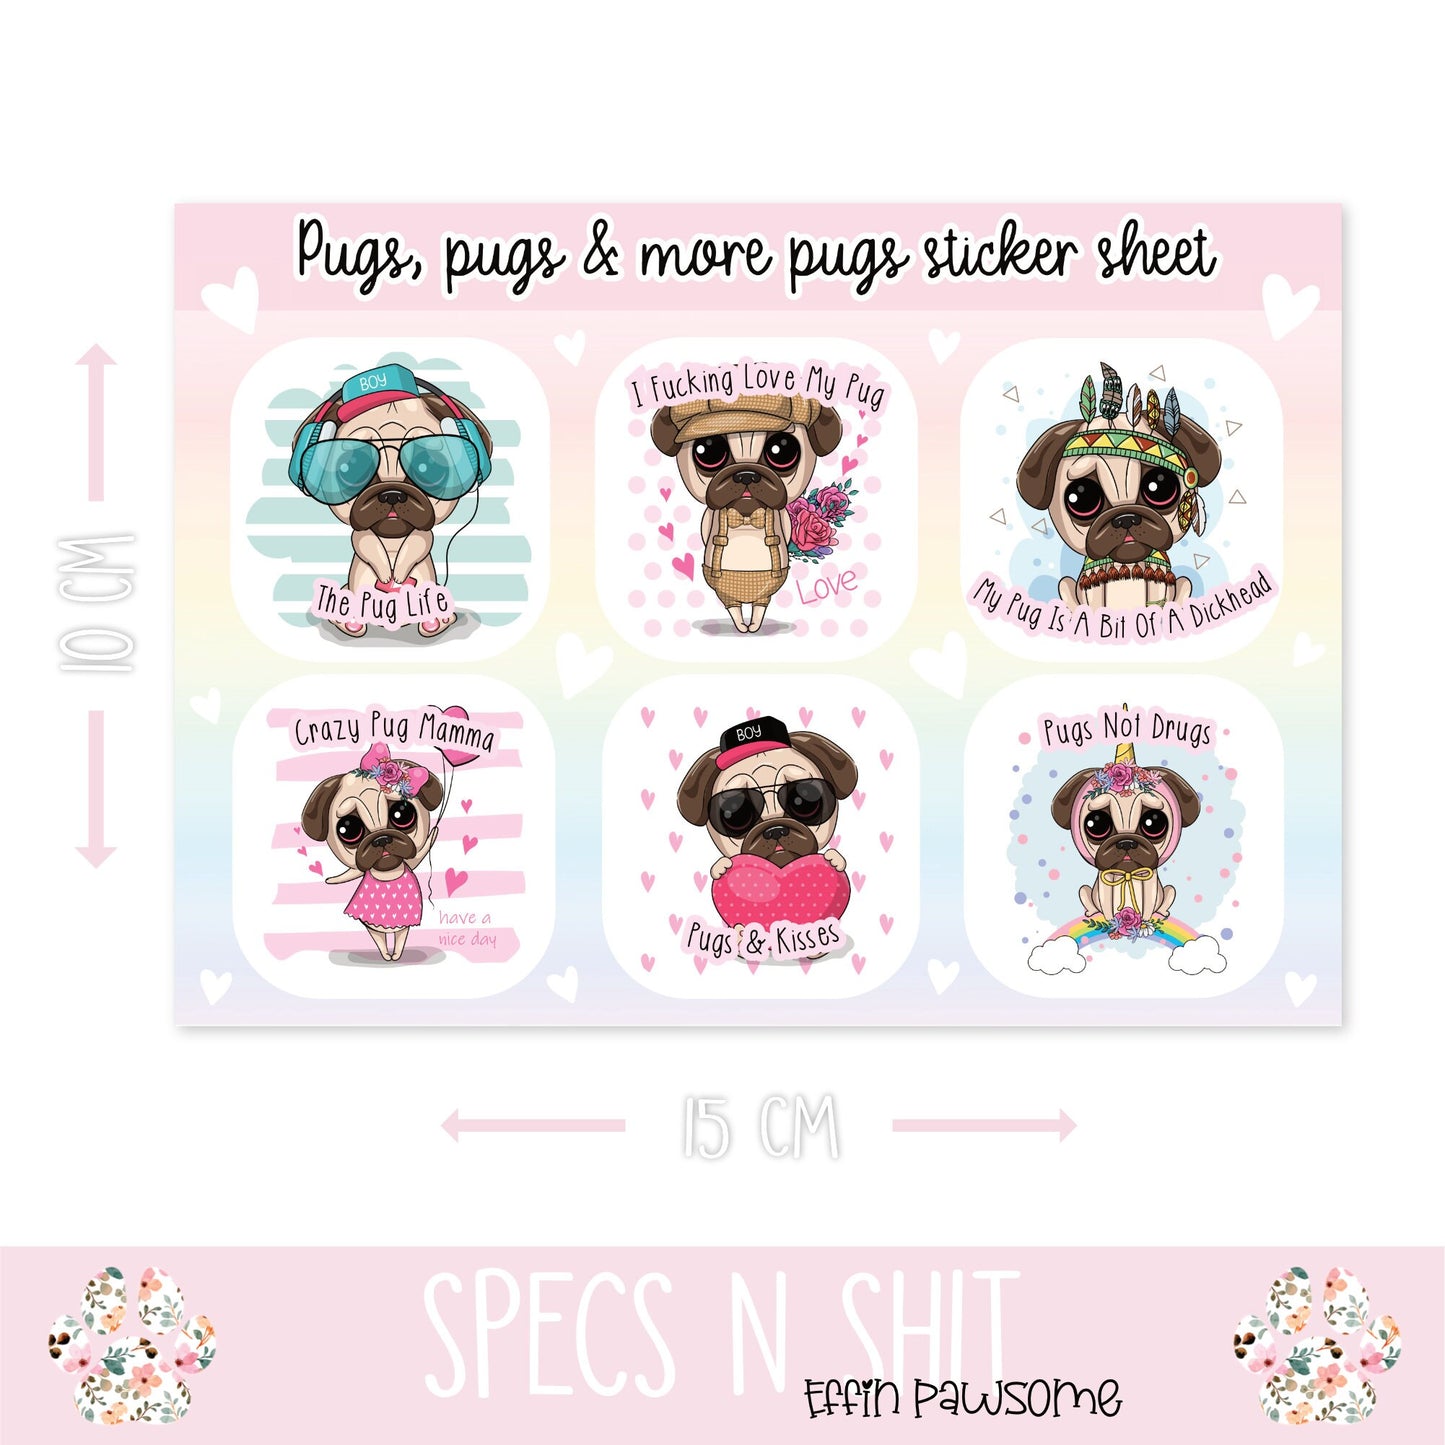 Funny Pug Sticker Sheet | Dog Stickers |Puppy stickers | Sticker Sheet | Journal Stickers | Novelty Gift Idea | Funny Decals | Dog Lovers